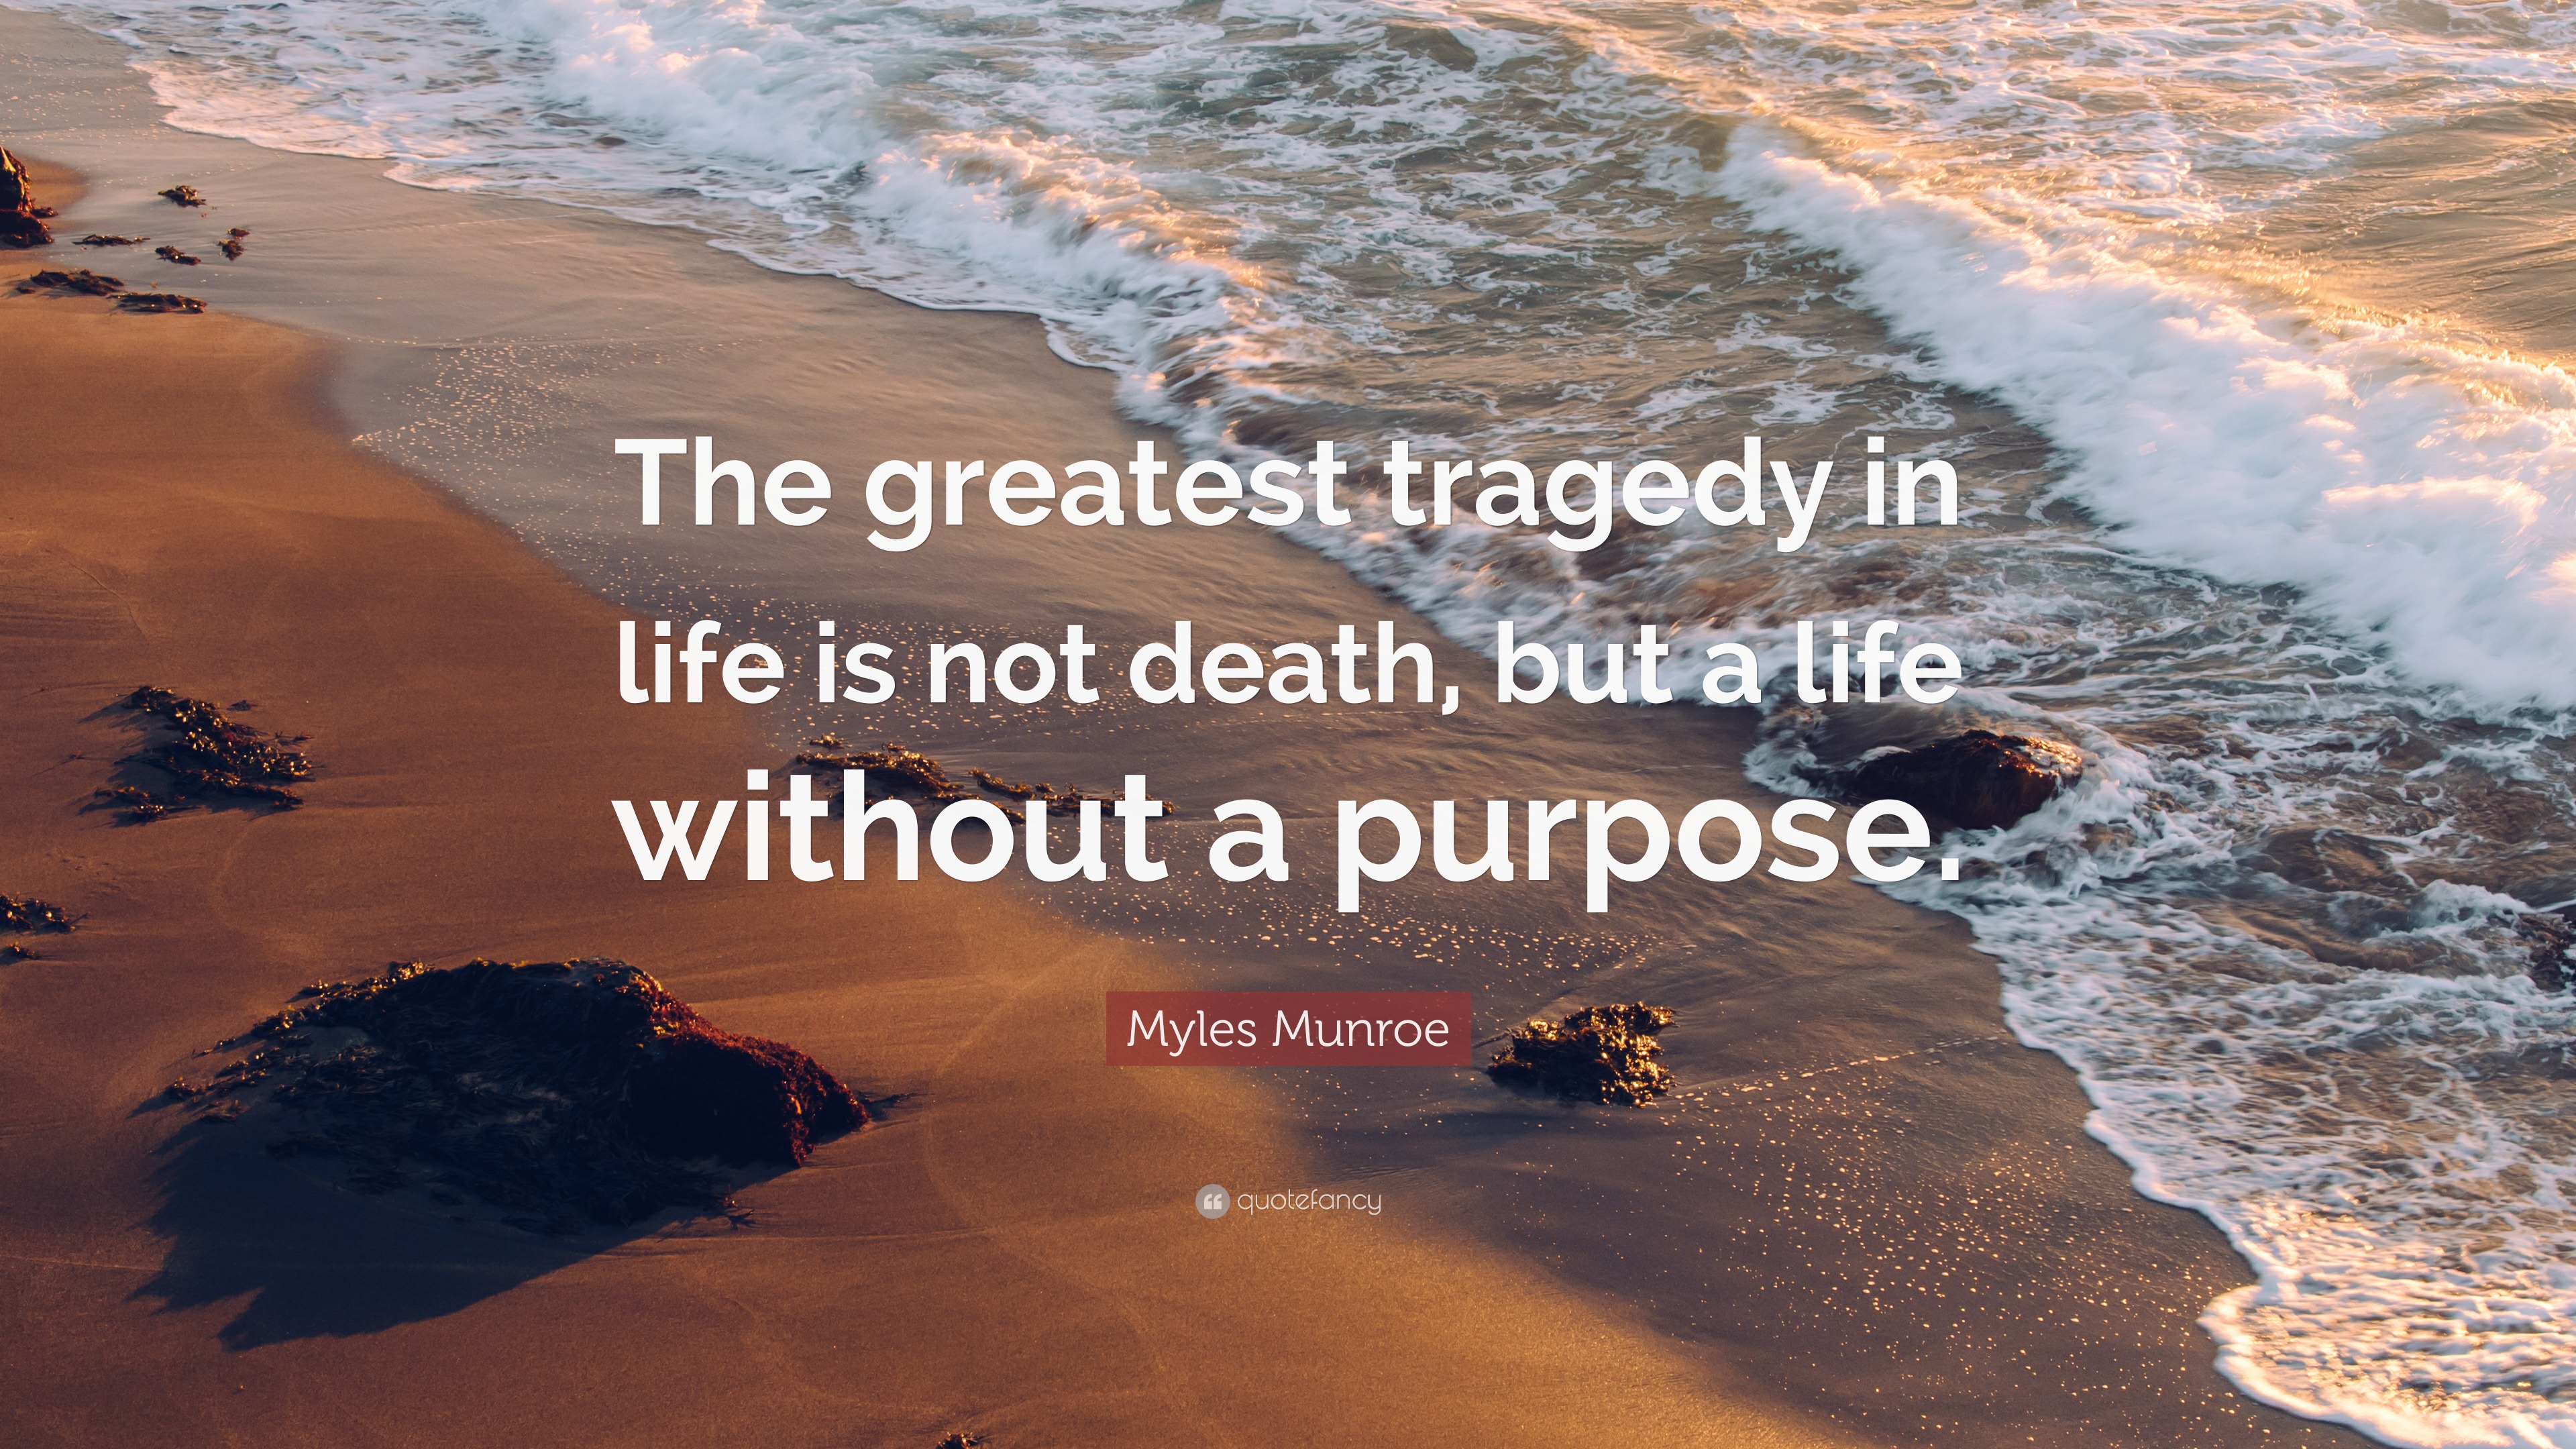 Myles Munroe Quote: “The greatest tragedy in life is not death, but a